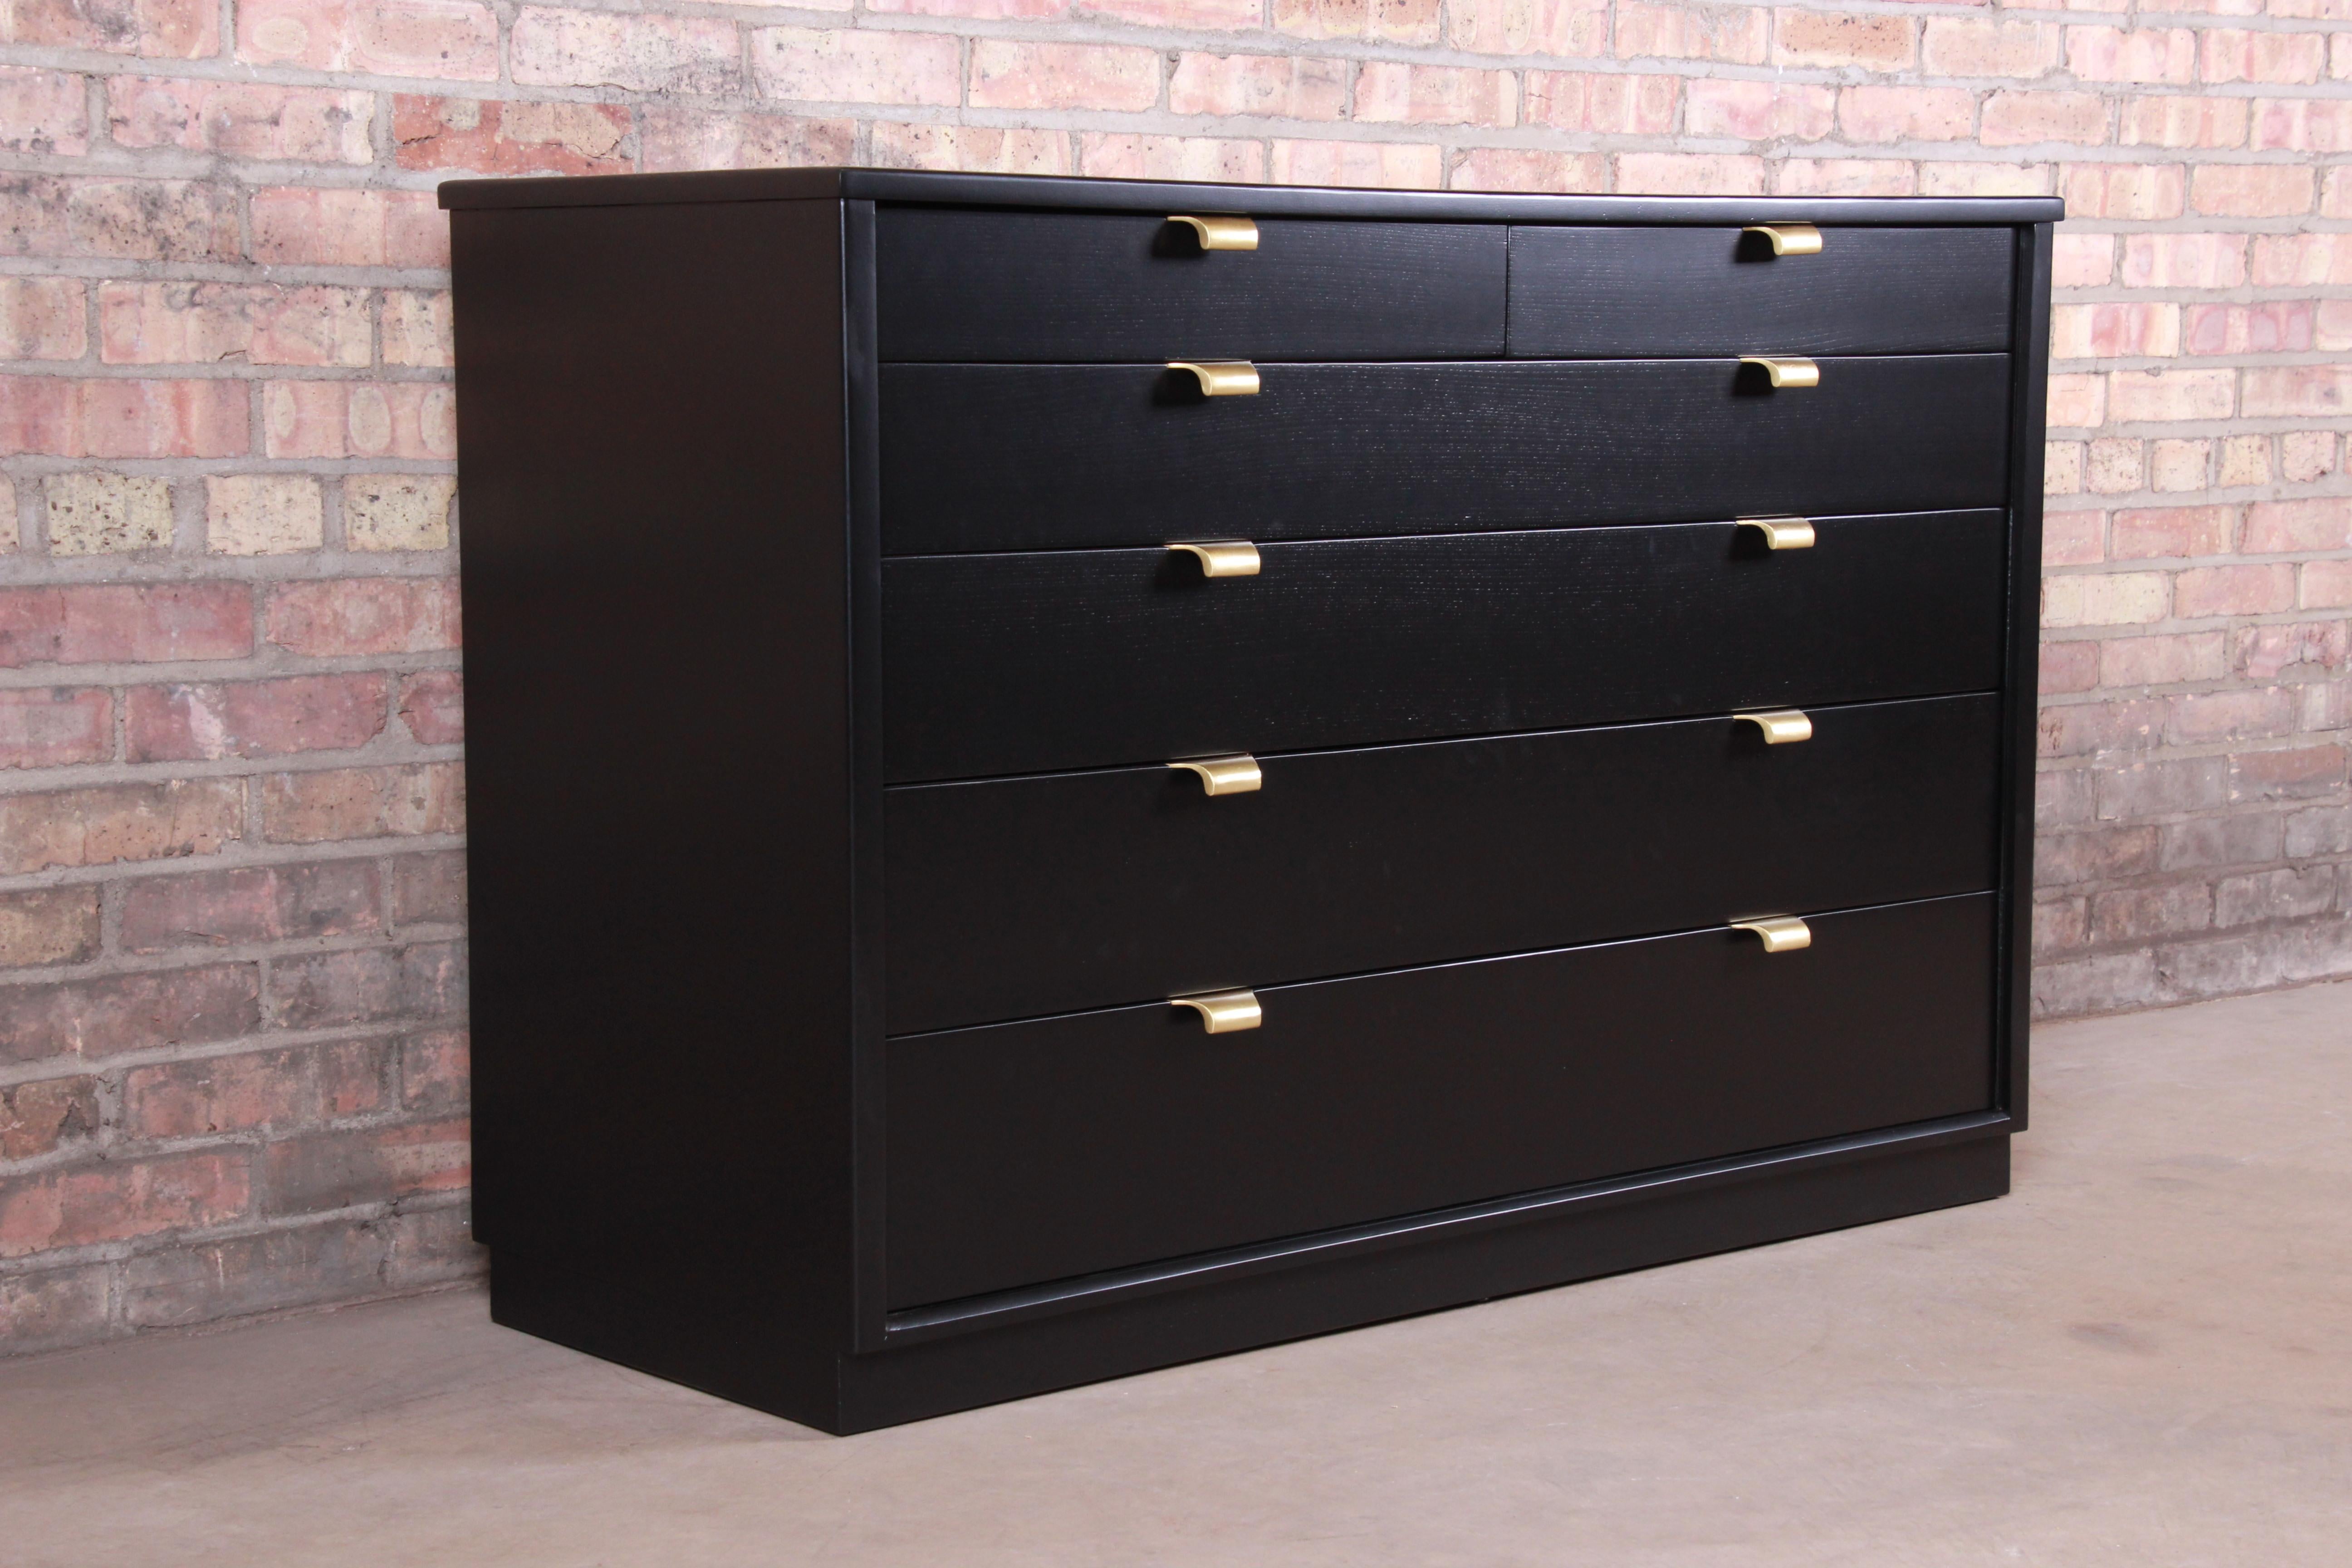 An exceptional black lacquered dresser chest or sideboard credenza

By Edward Wormley for Drexel 